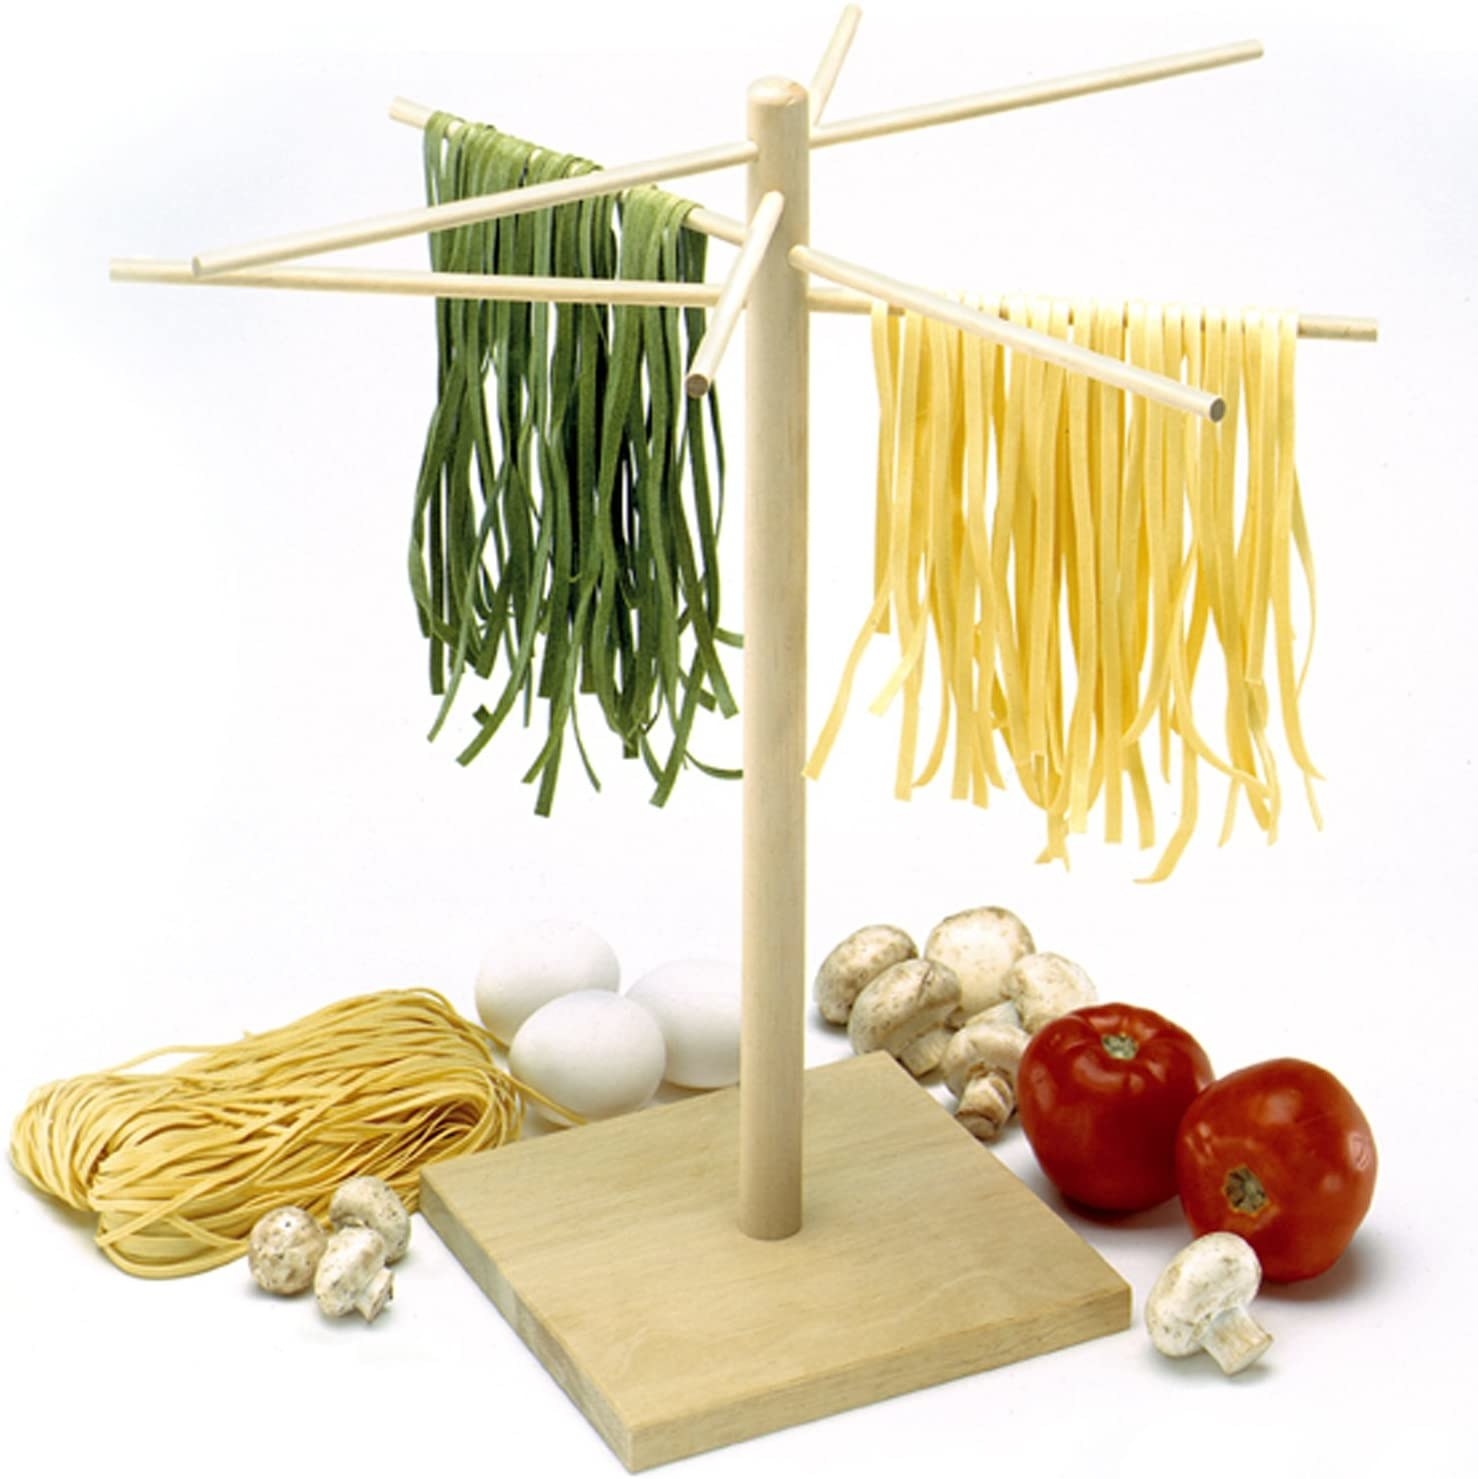 The pasta rack weighed down with two different kinds of noodles